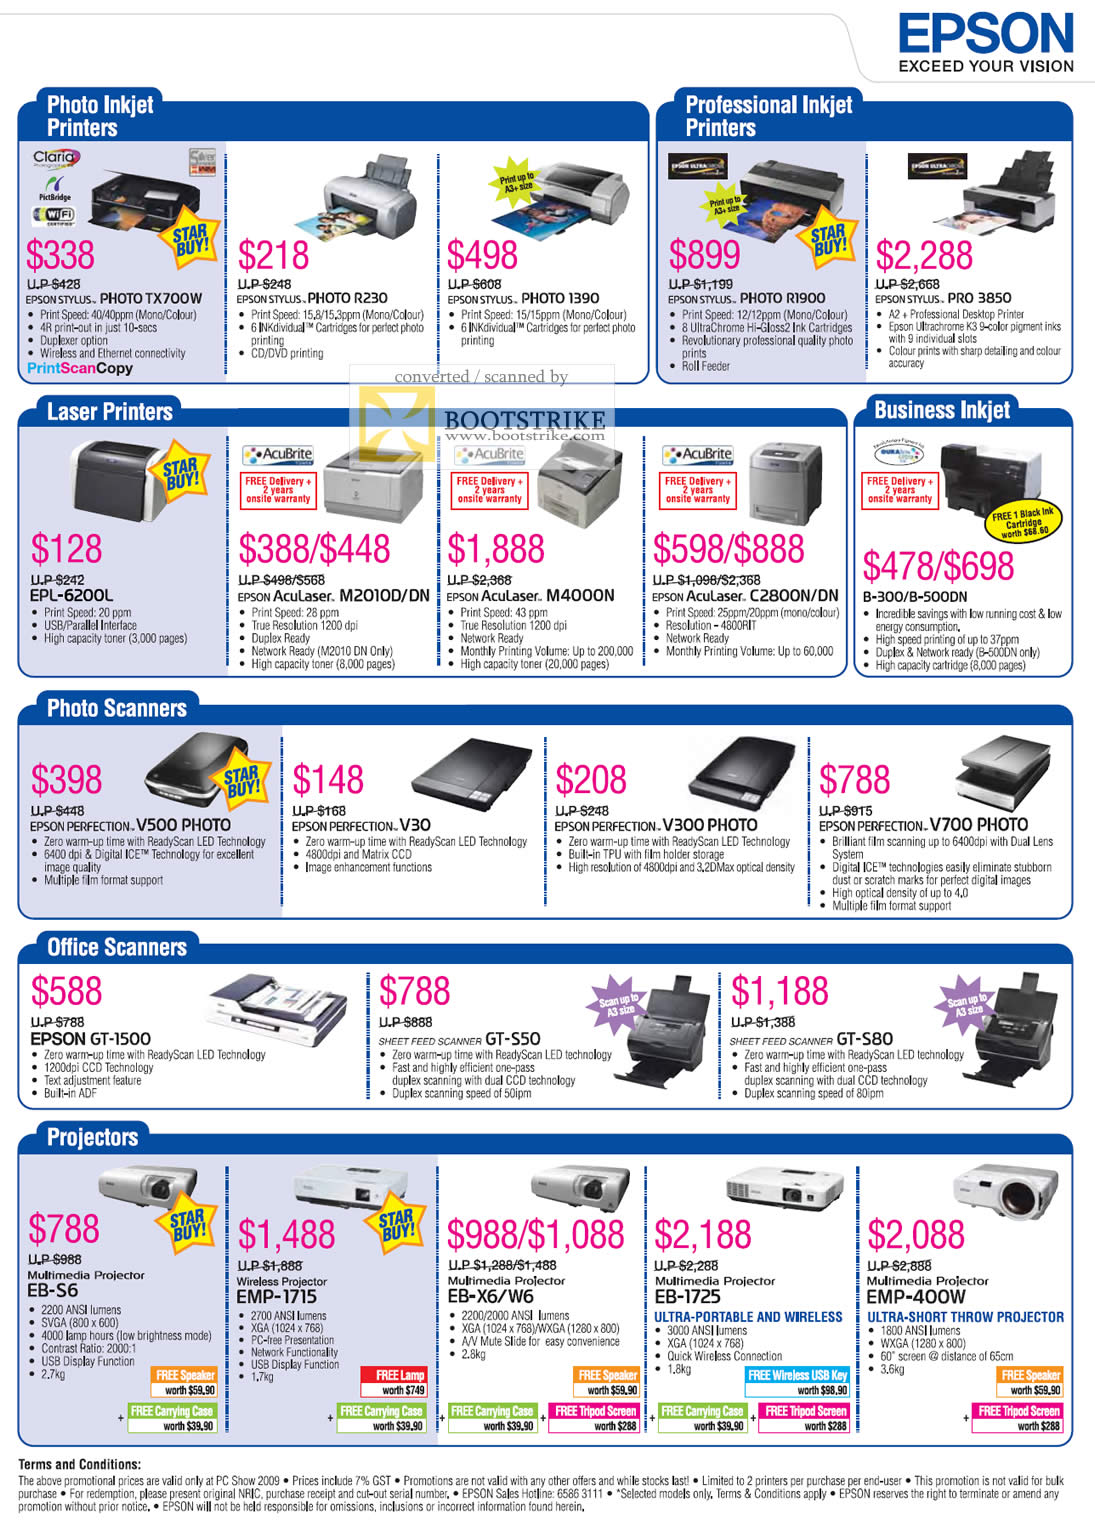 PC Show 2009 price list image brochure of Epson Printers Photo Inkjet Laser Scanners Office Projectors